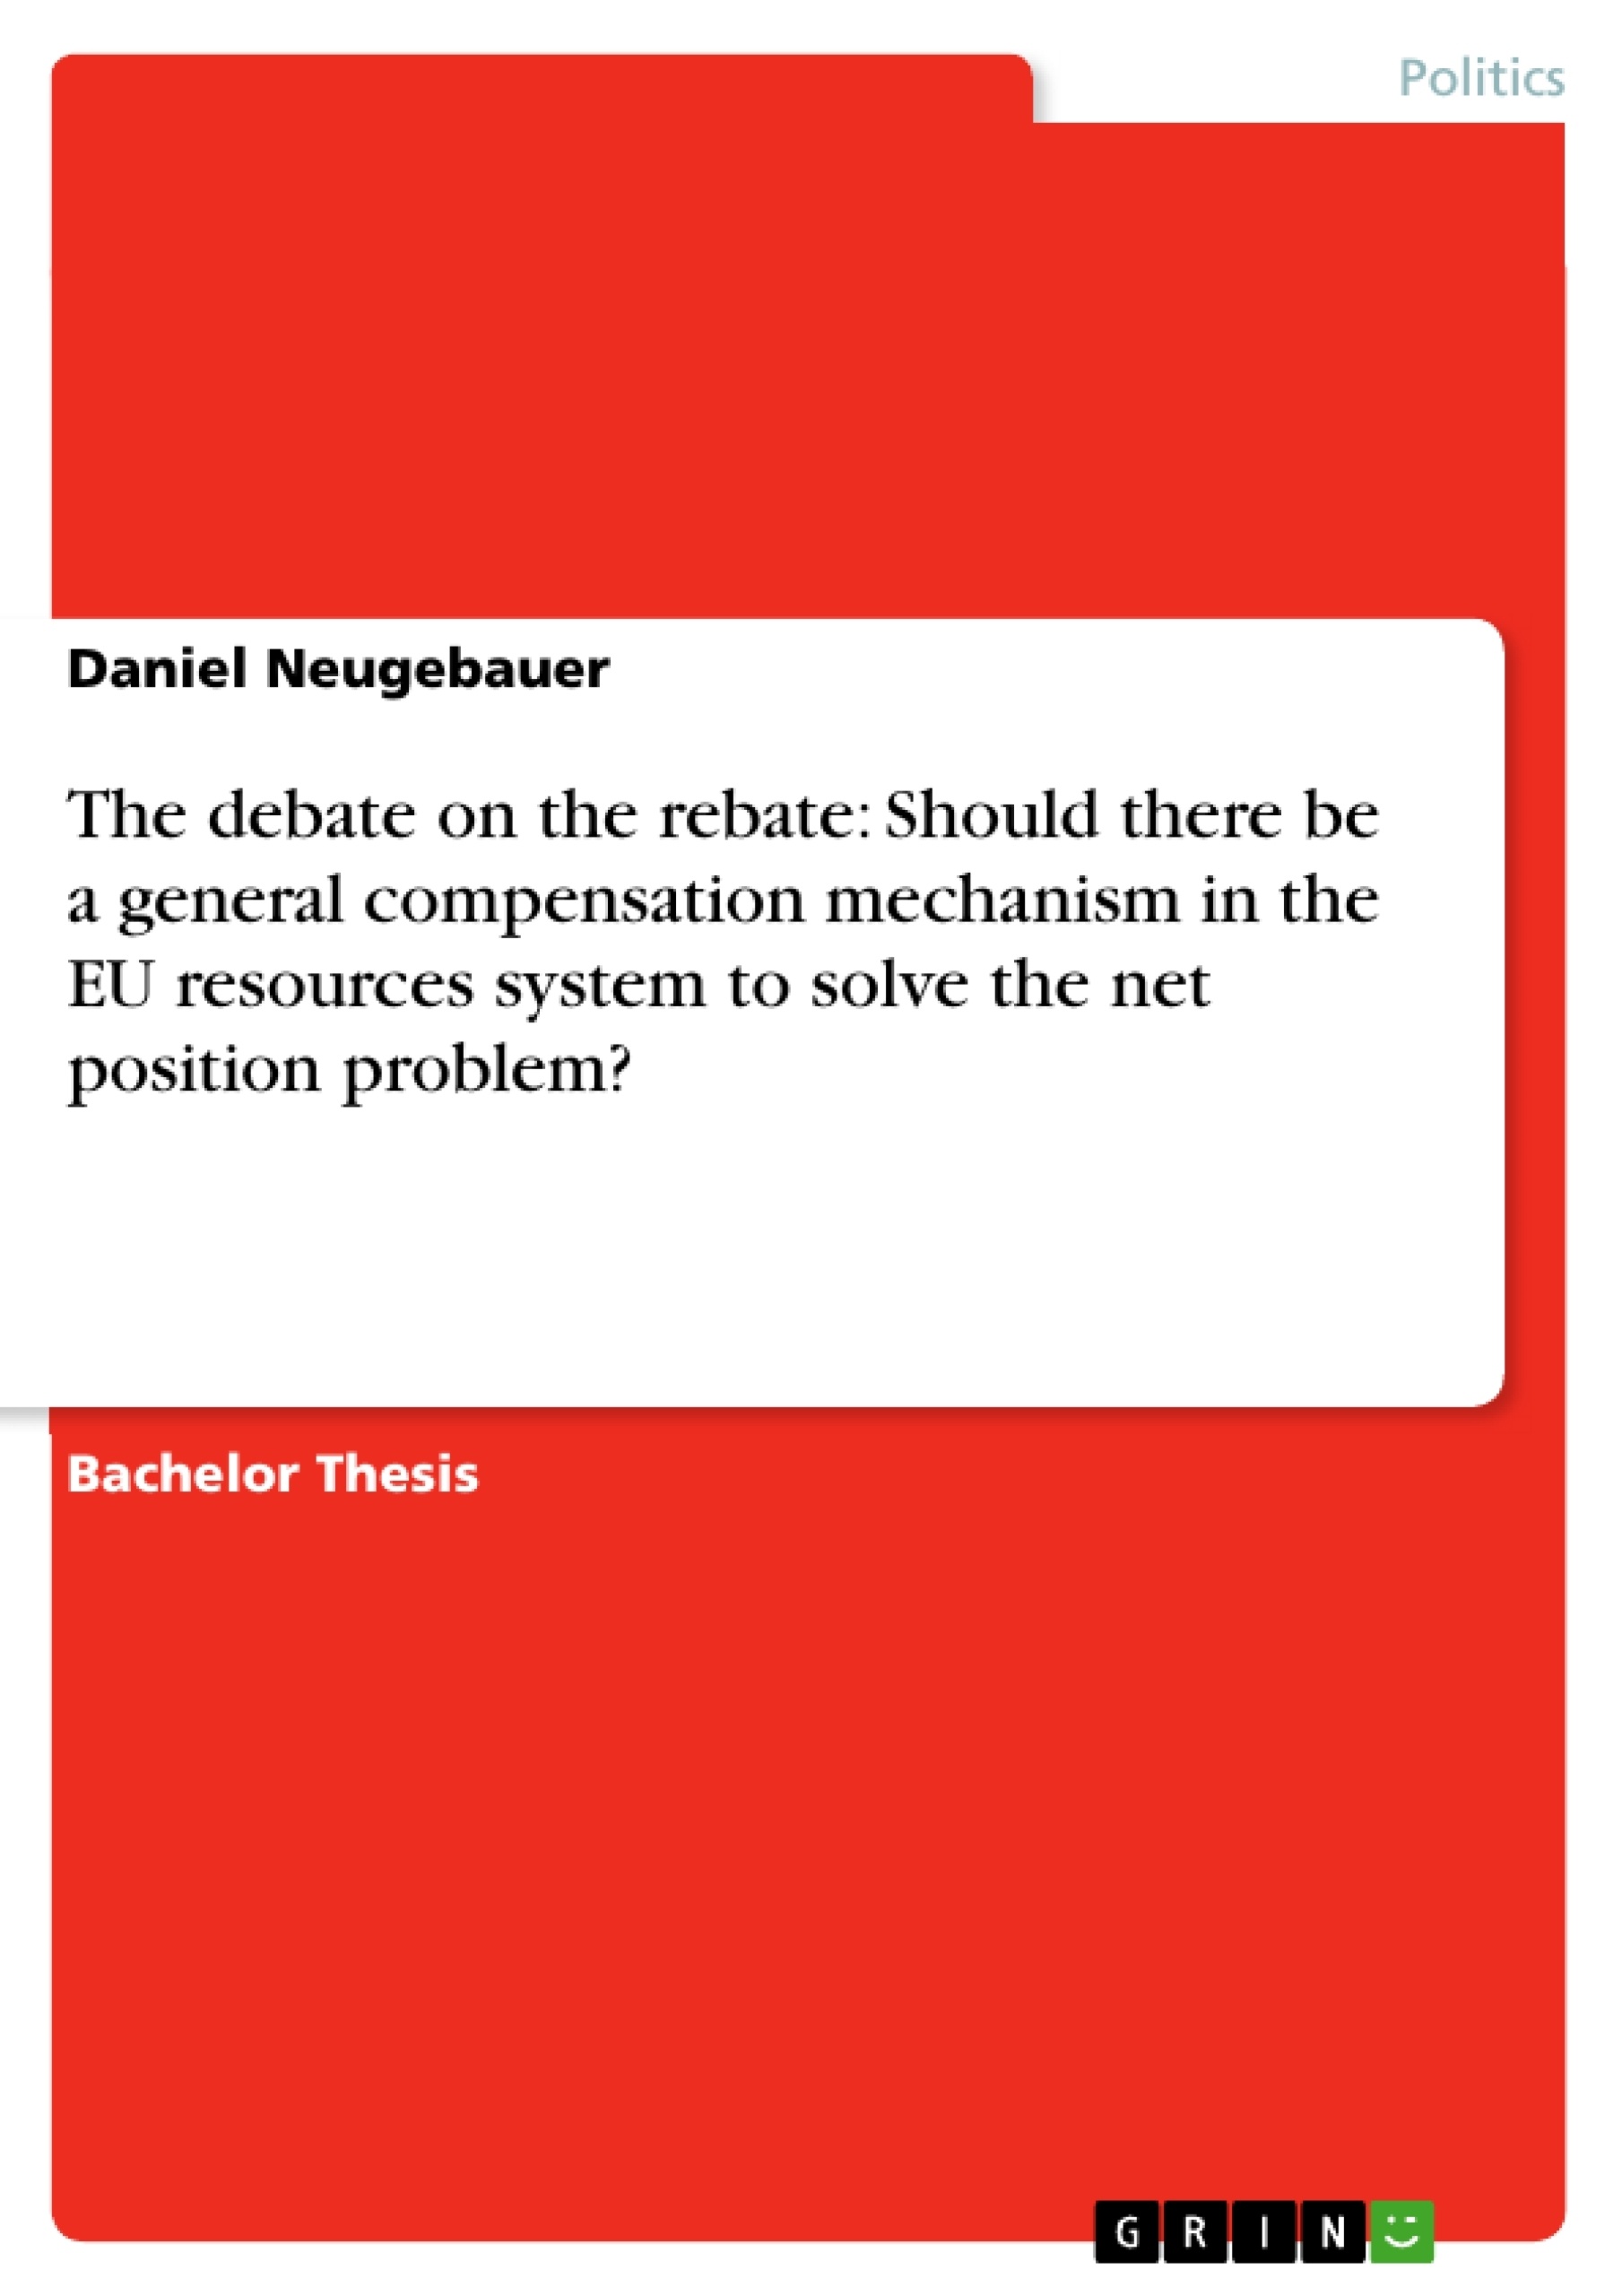 Titel: The debate on the rebate: Should there be a general compensation mechanism in the EU resources system to solve the net position problem?